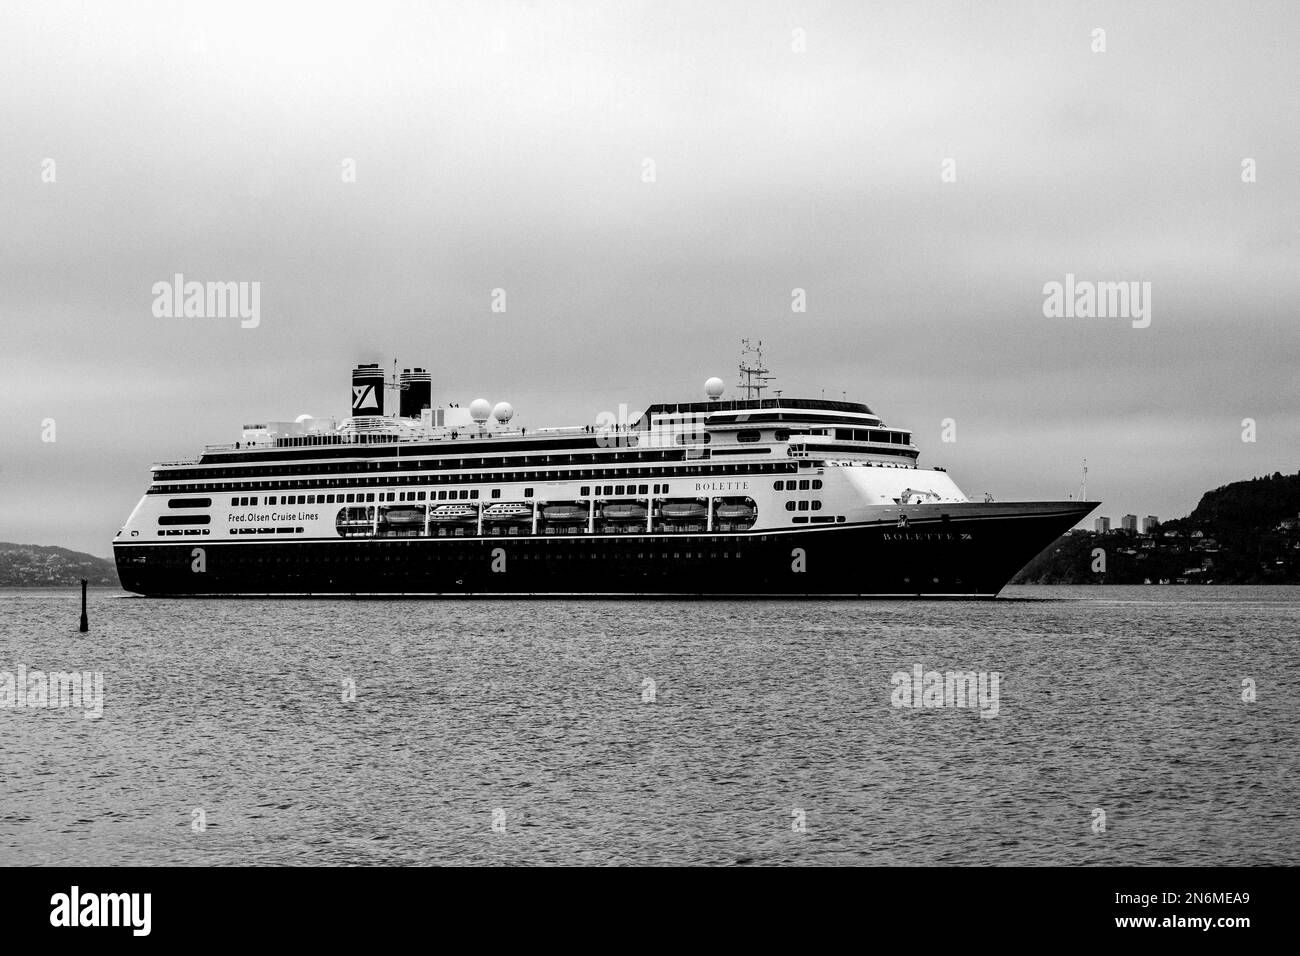 Cruise ship Bolette at Byfjorden, arriving at the port of Bergen, Norway. Stock Photo